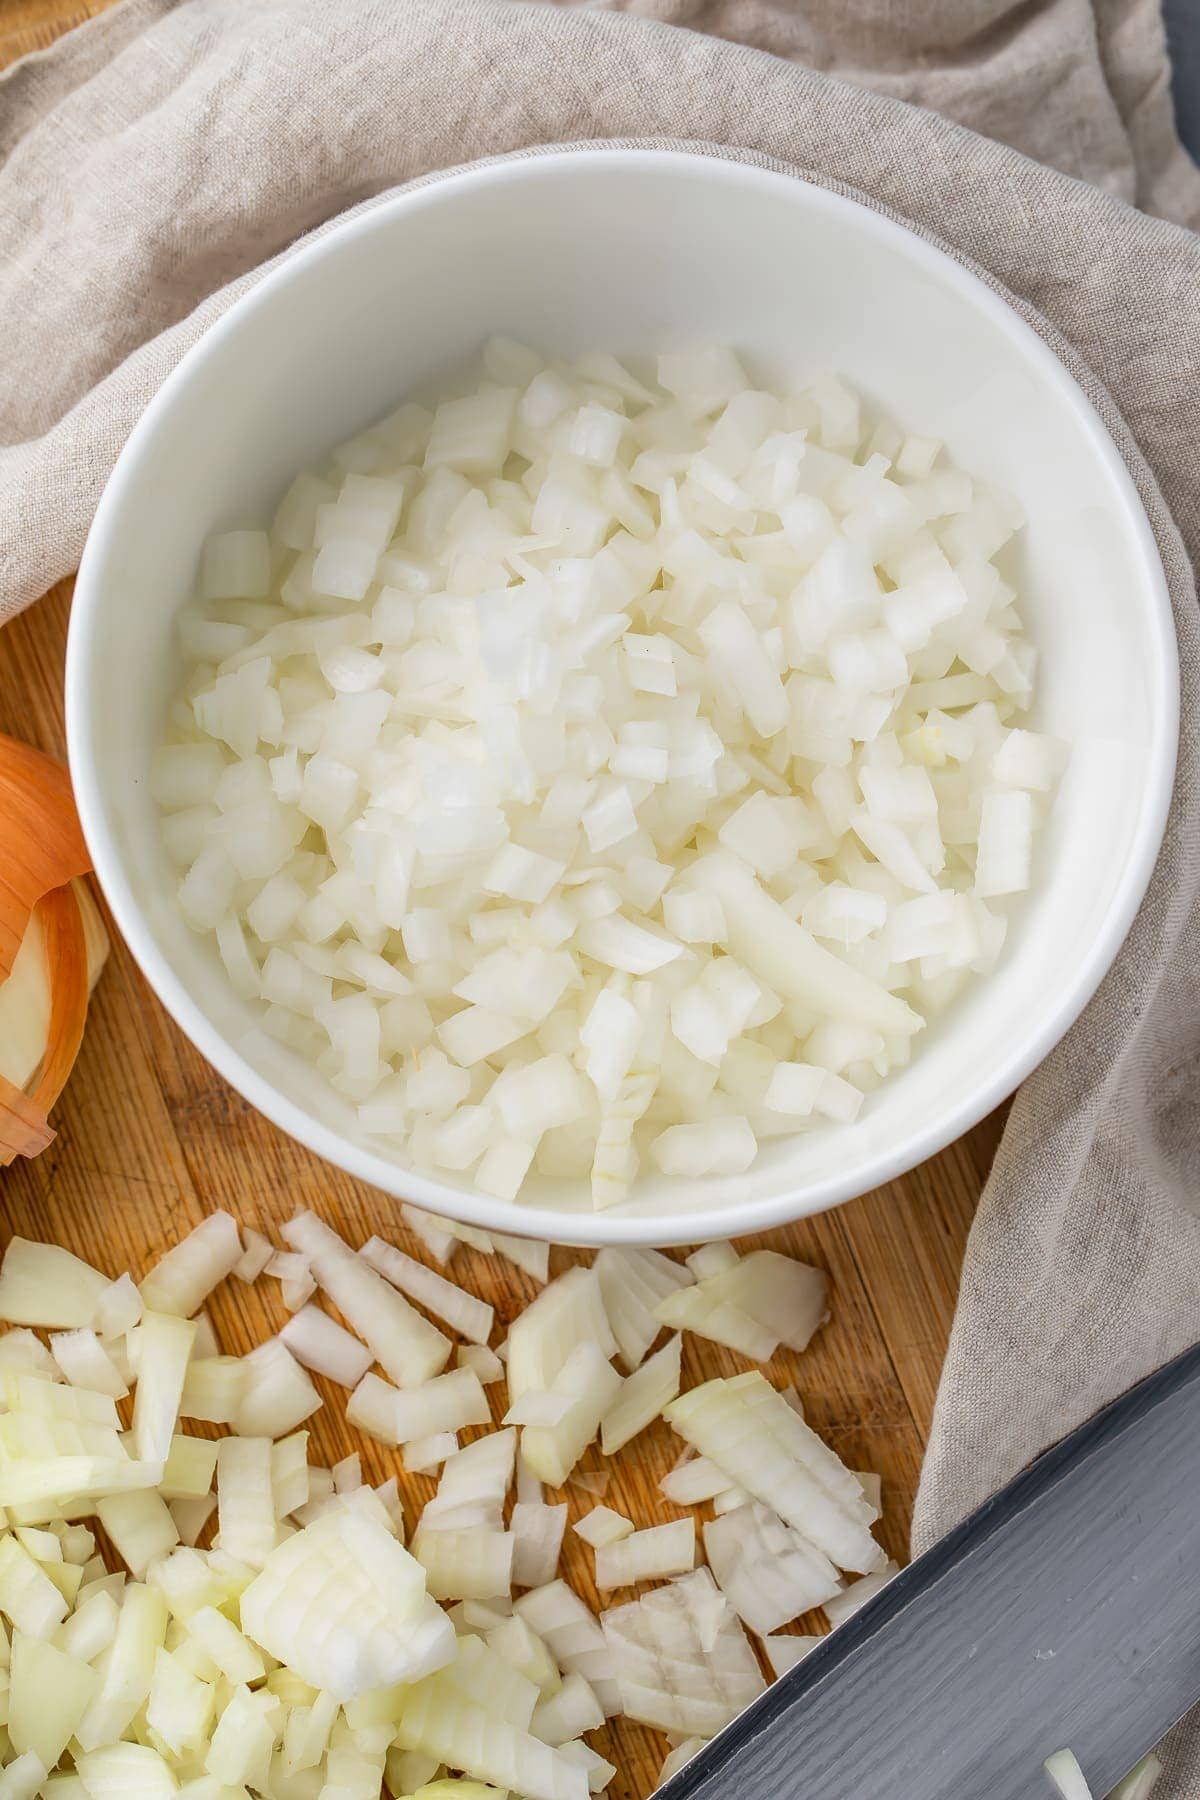 How to Cut and Slice an Onion Effortlessly